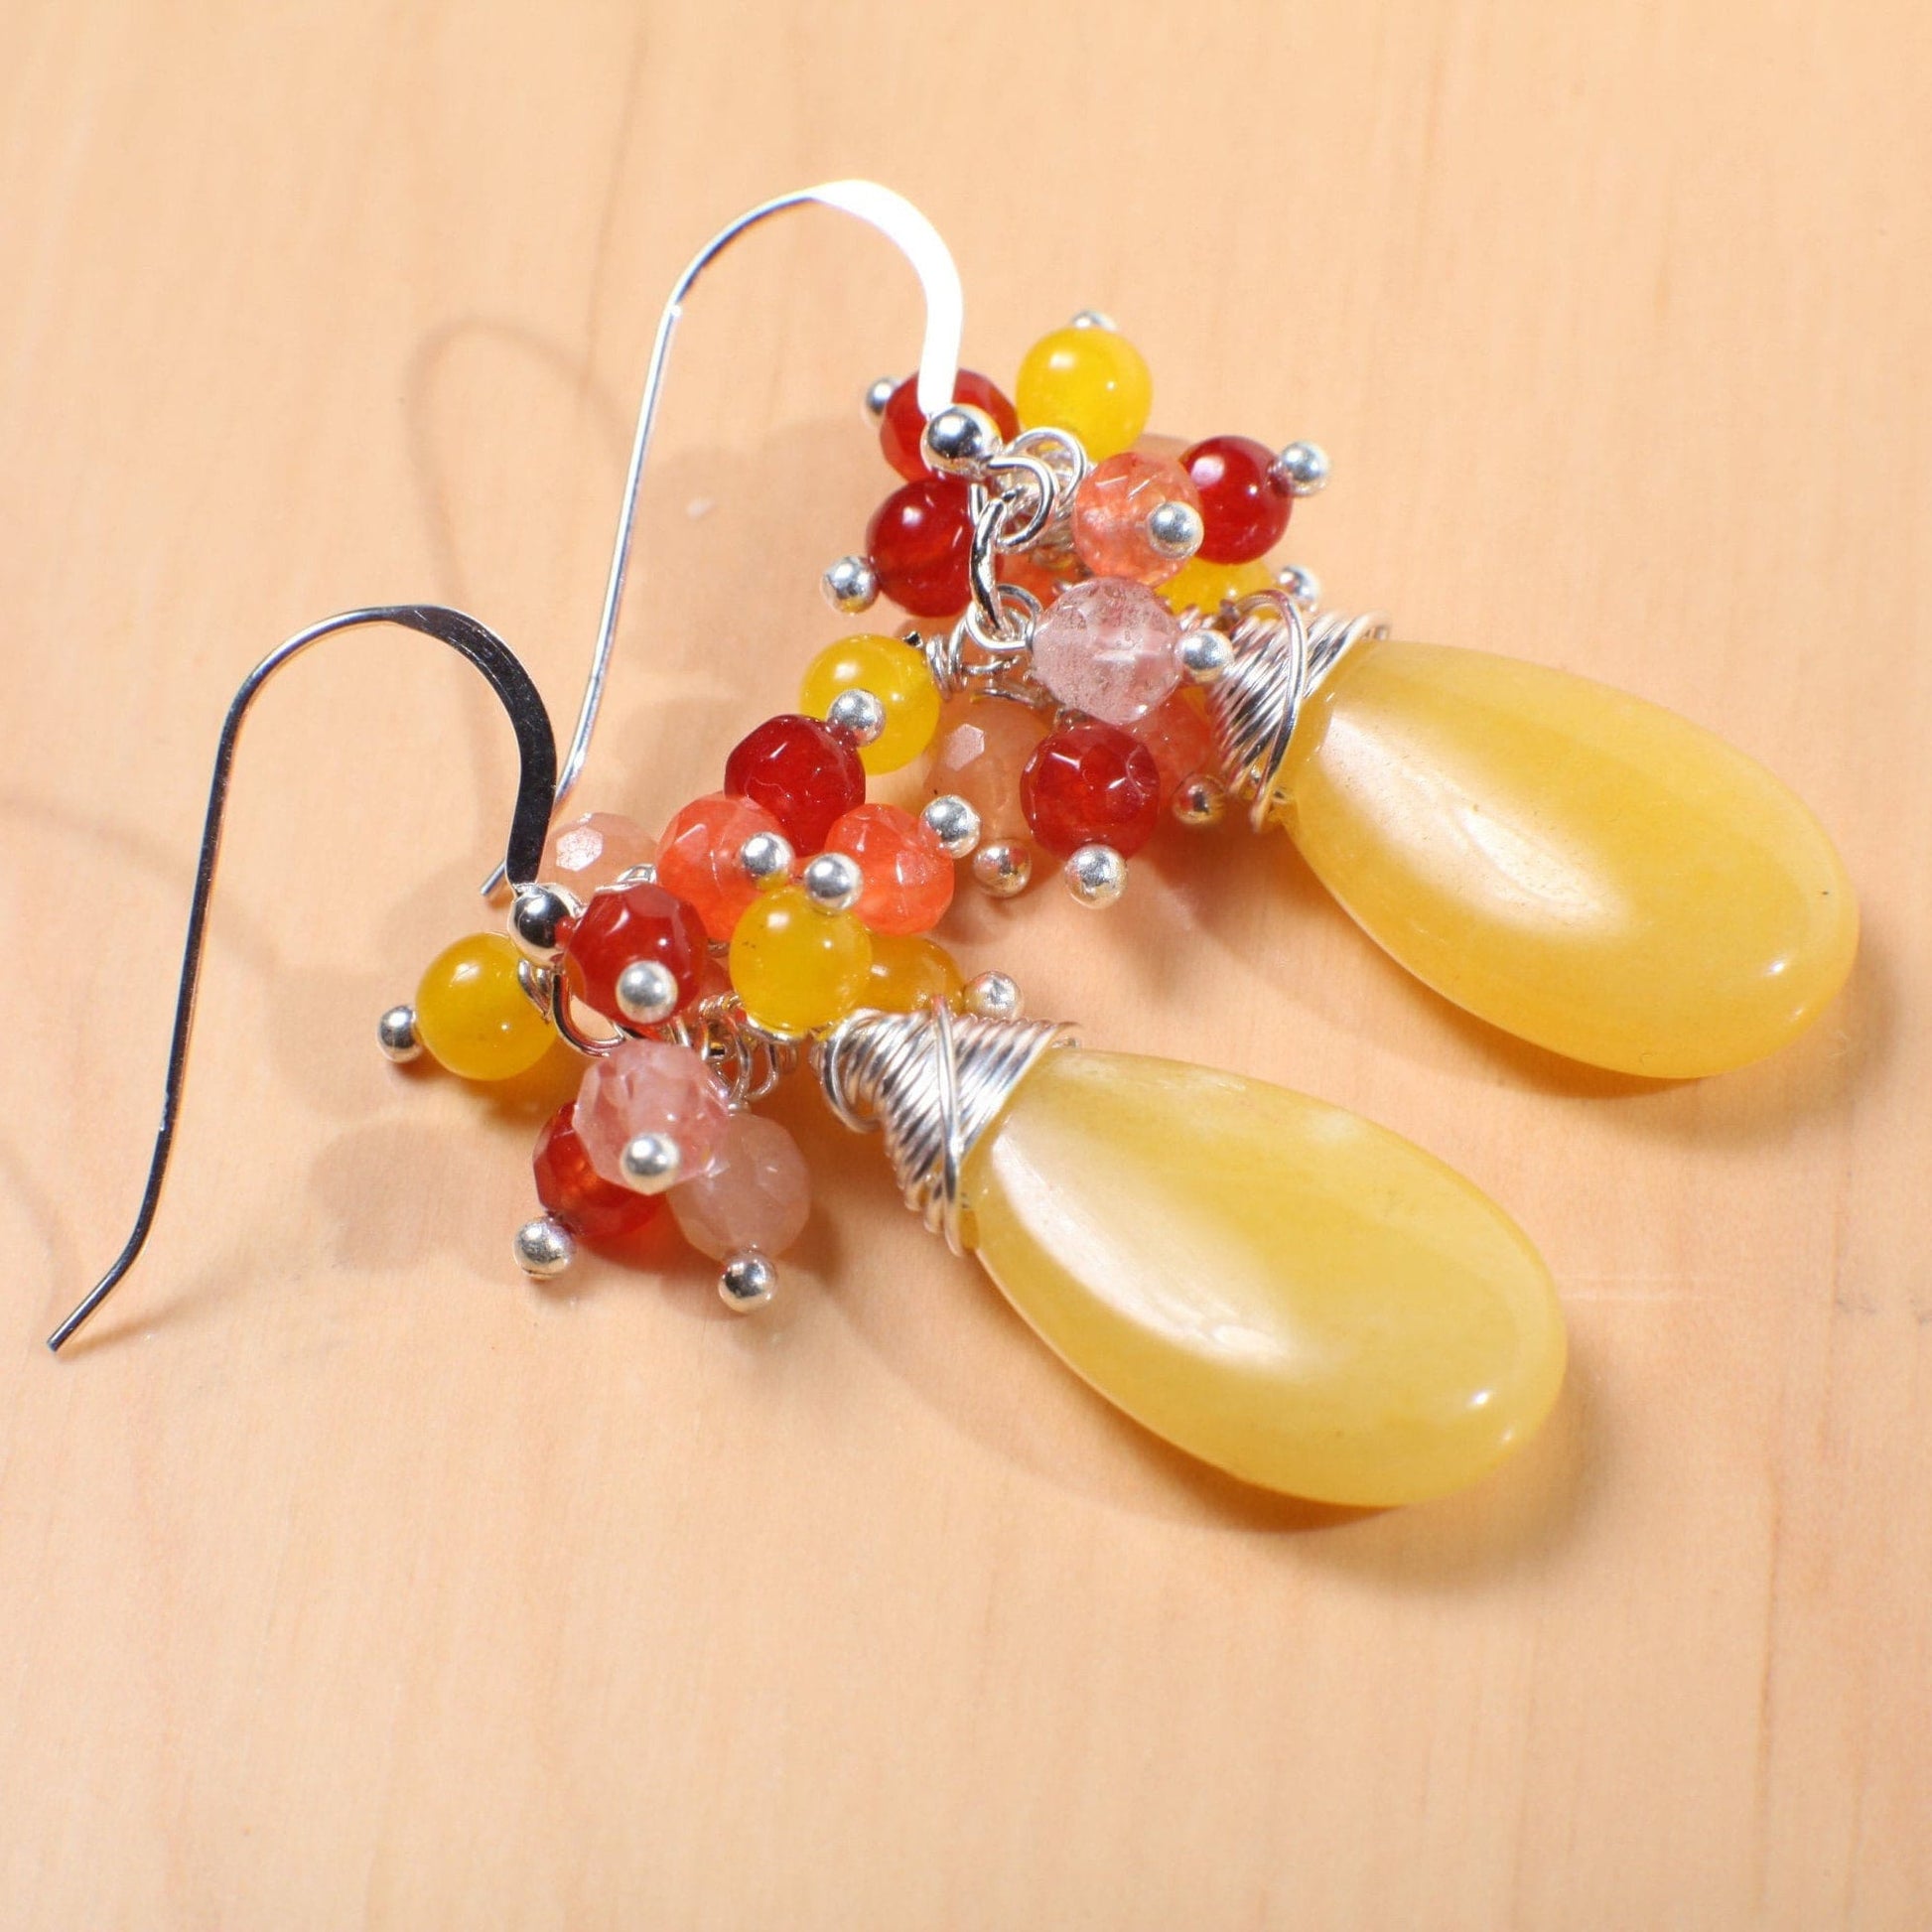 Carnelian, Yellow Jade, Strawberry Quartz Clusters, Ambronite Long Tear Drop Wire Wrapped 925 Sterling Silver Earwire,Available in Leverback